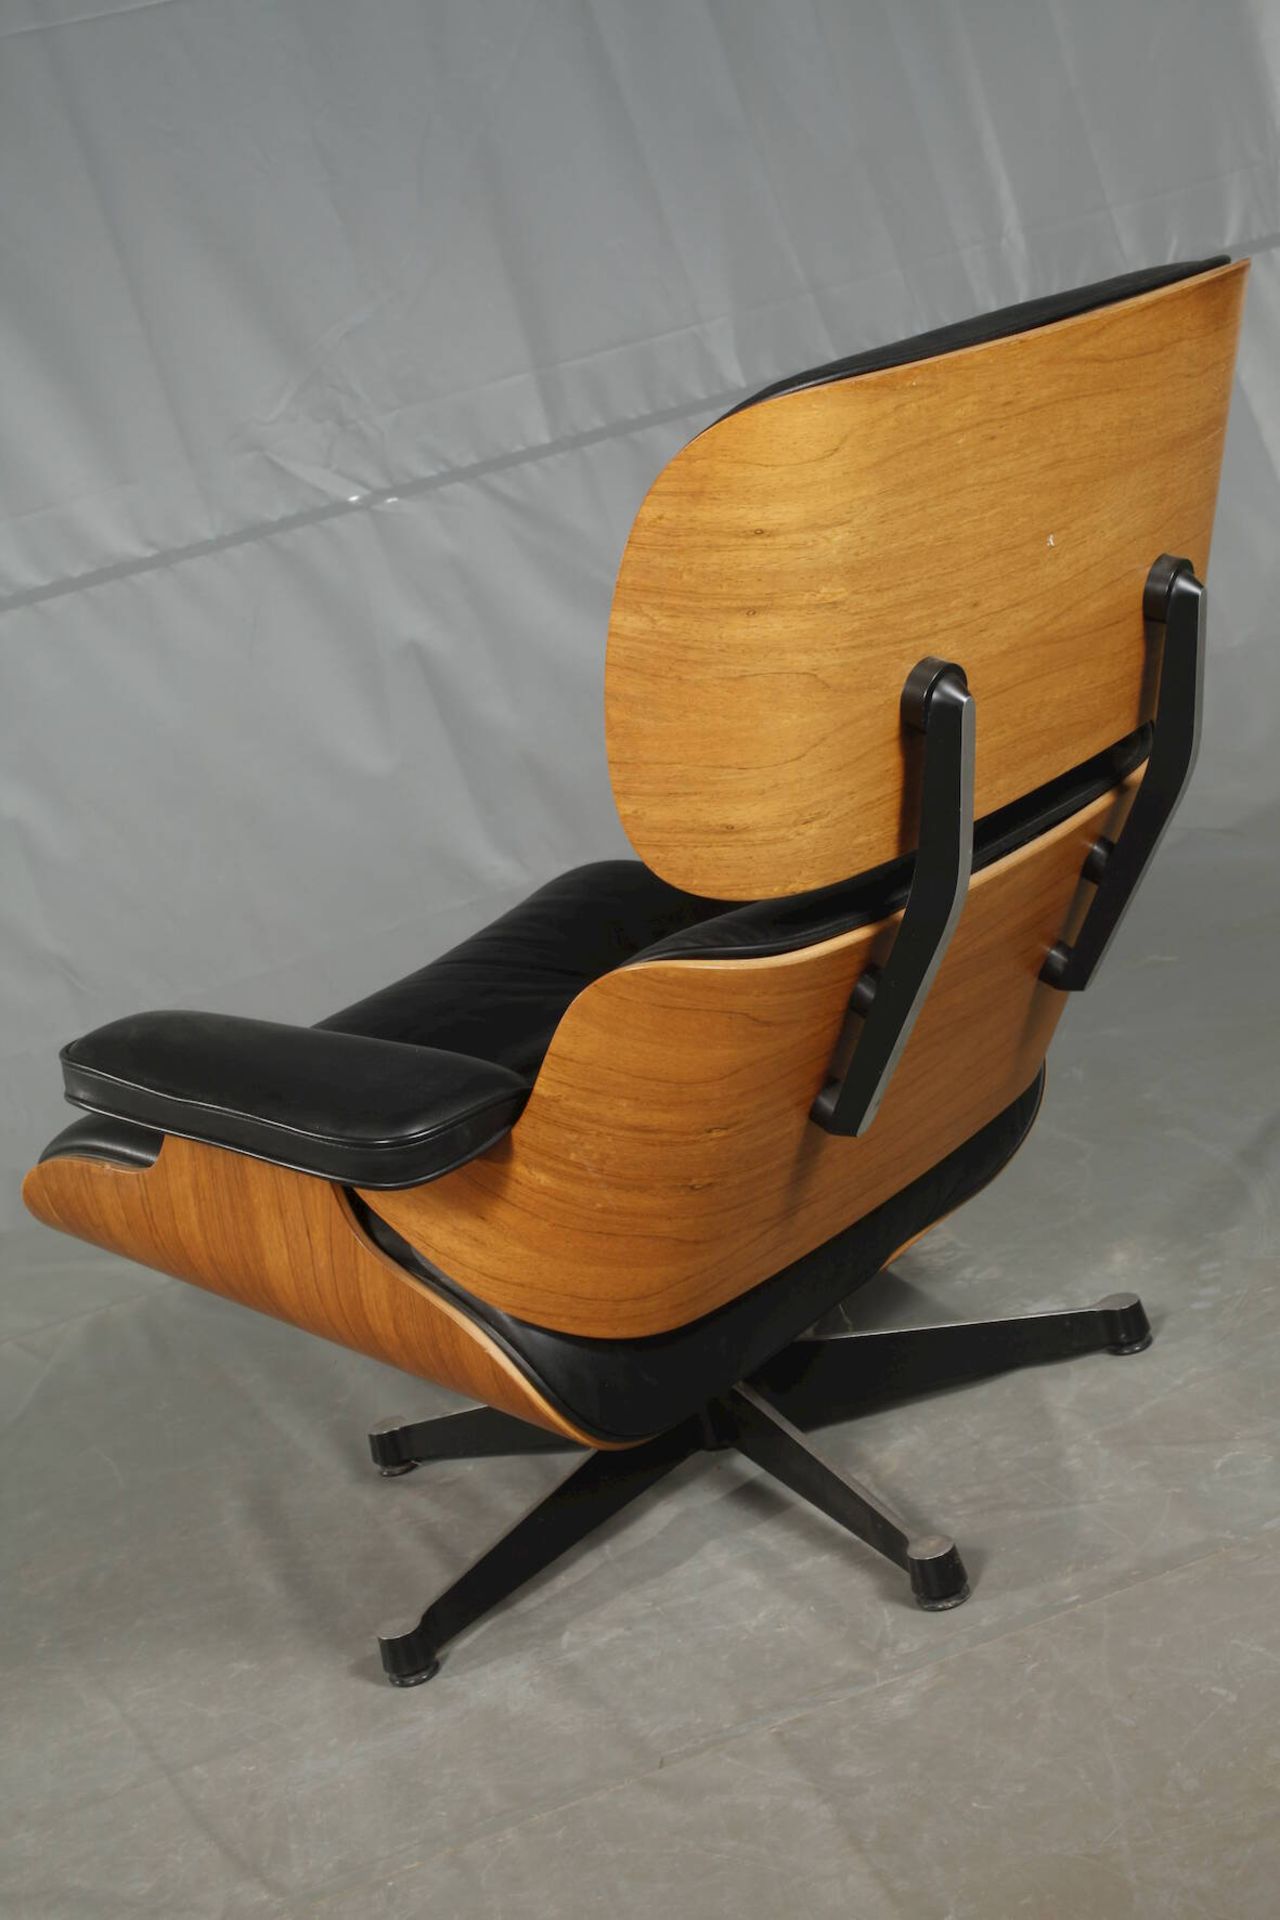 Eames Lounge Chair - Image 3 of 4